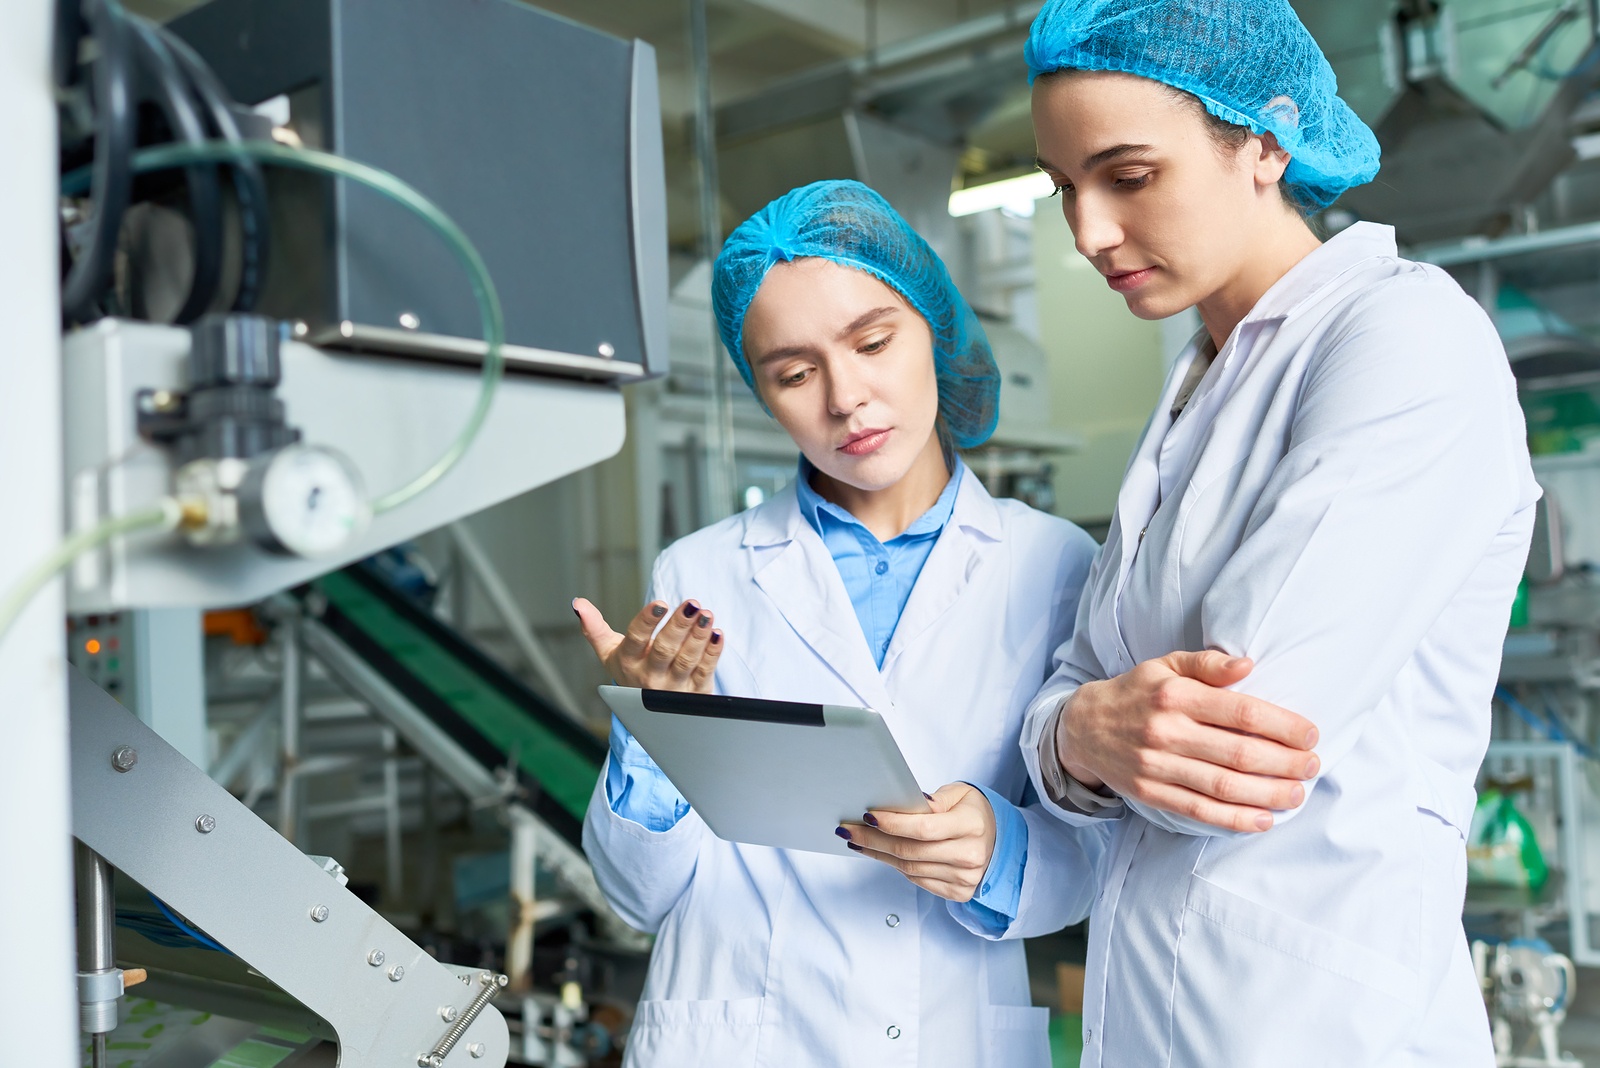 Bigstock  125354314 - Portrait Of Two Female Specialists Wearing Lab Coats Working At Modern Food Factory And Checking Pro